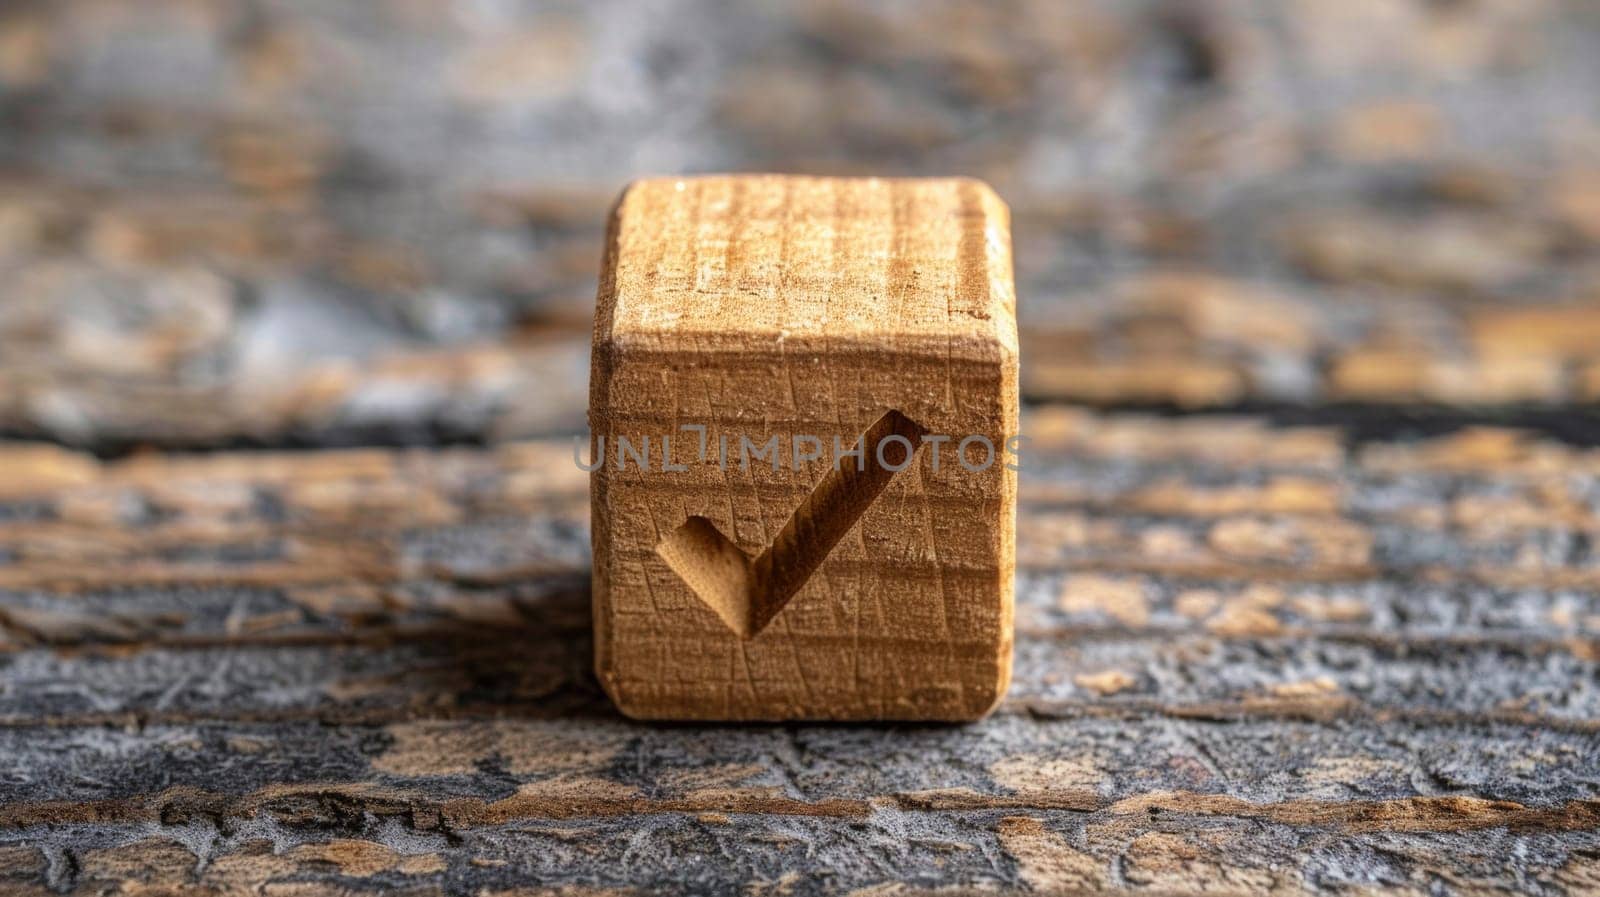 A wooden block with a check mark on it sitting in the dirt